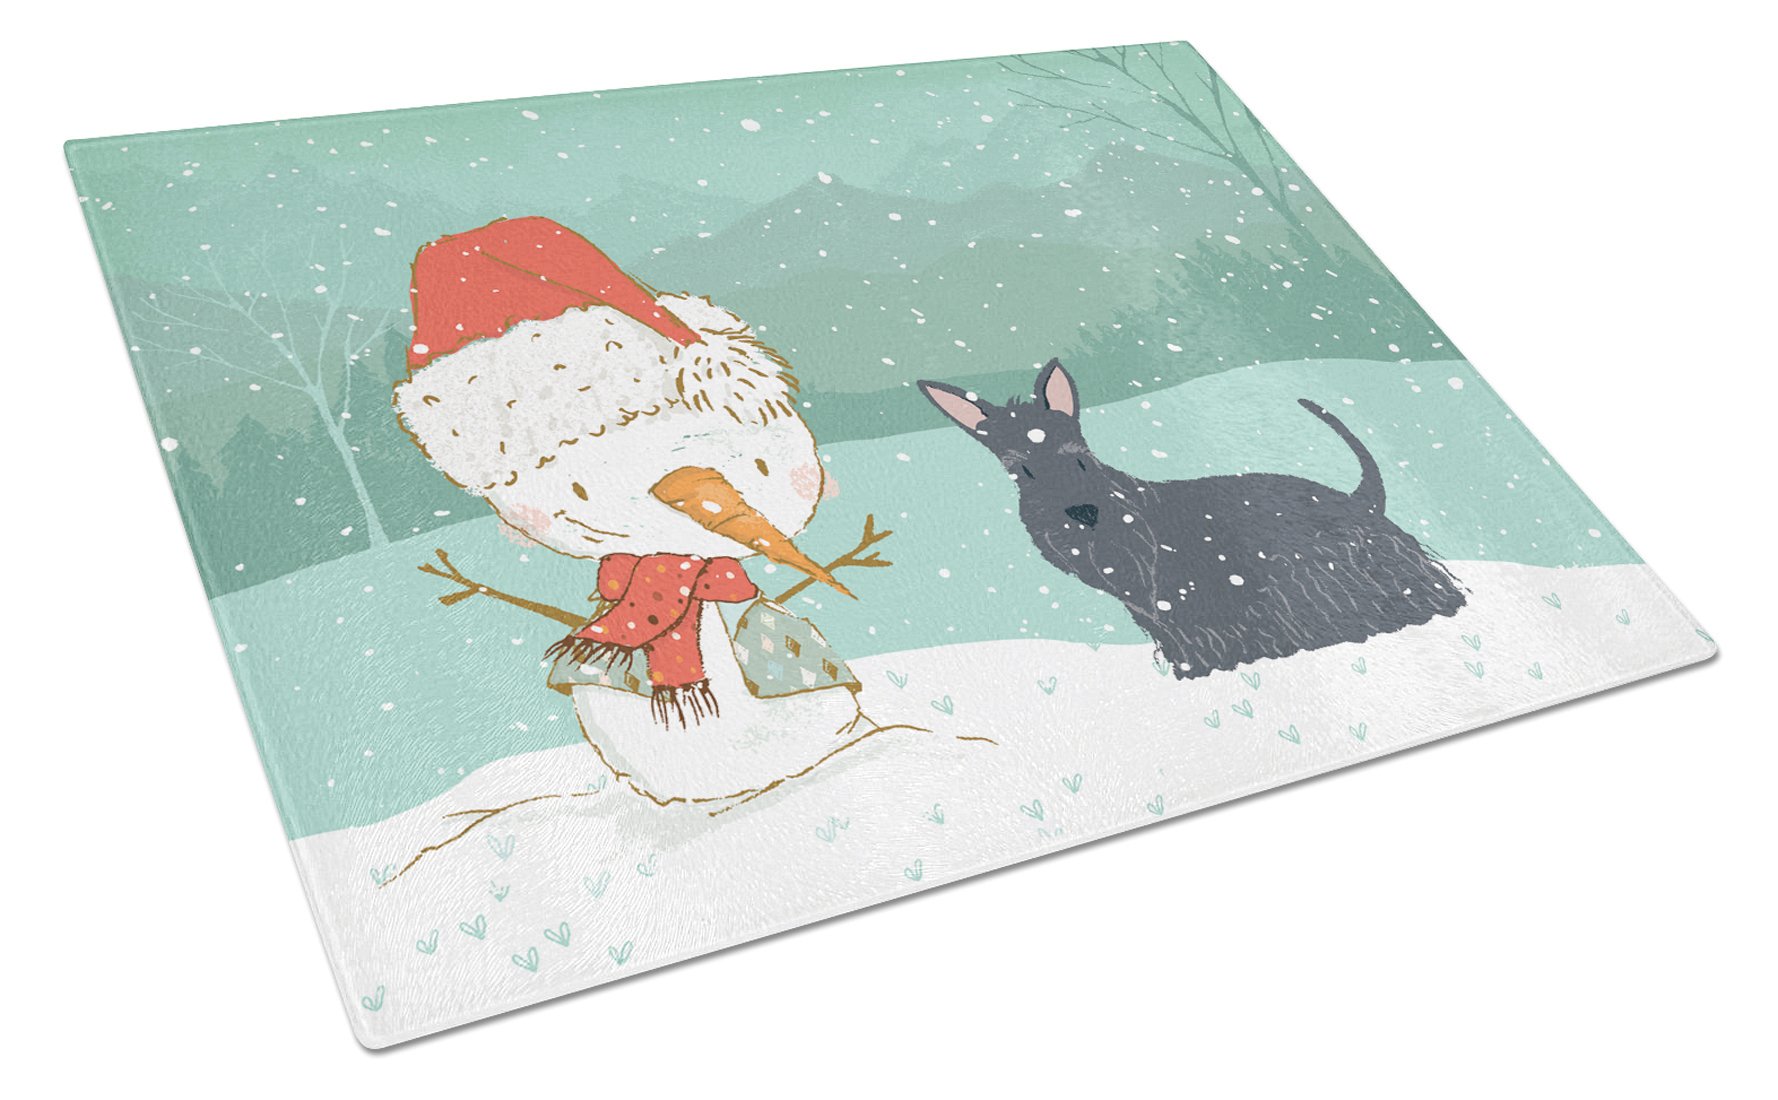 Scottish Terrier Snowman Christmas Glass Cutting Board Large CK2068LCB by Caroline's Treasures